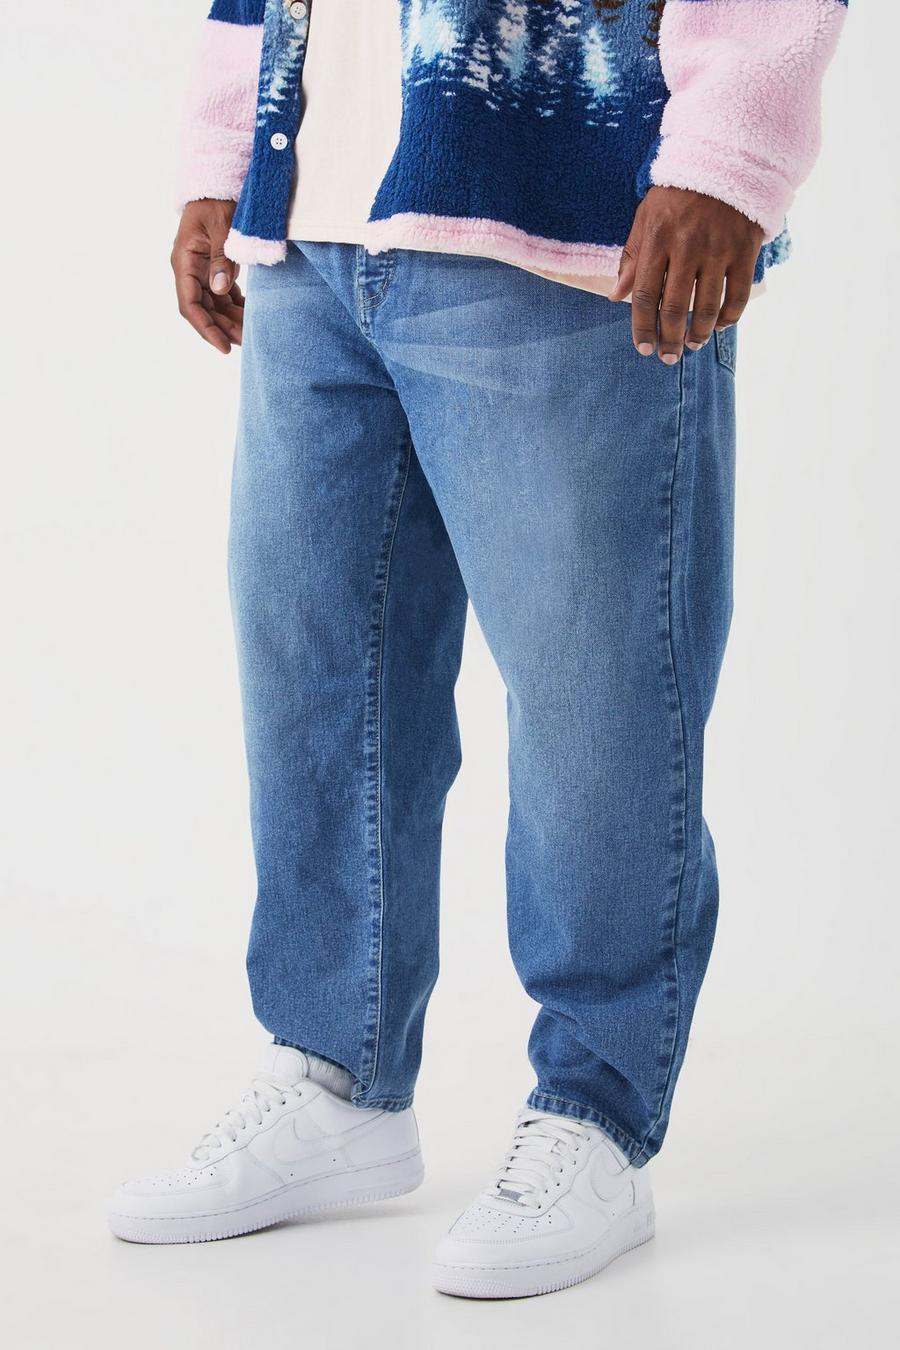 Mid blue Jacob Cohen mid-rise fitted jeans